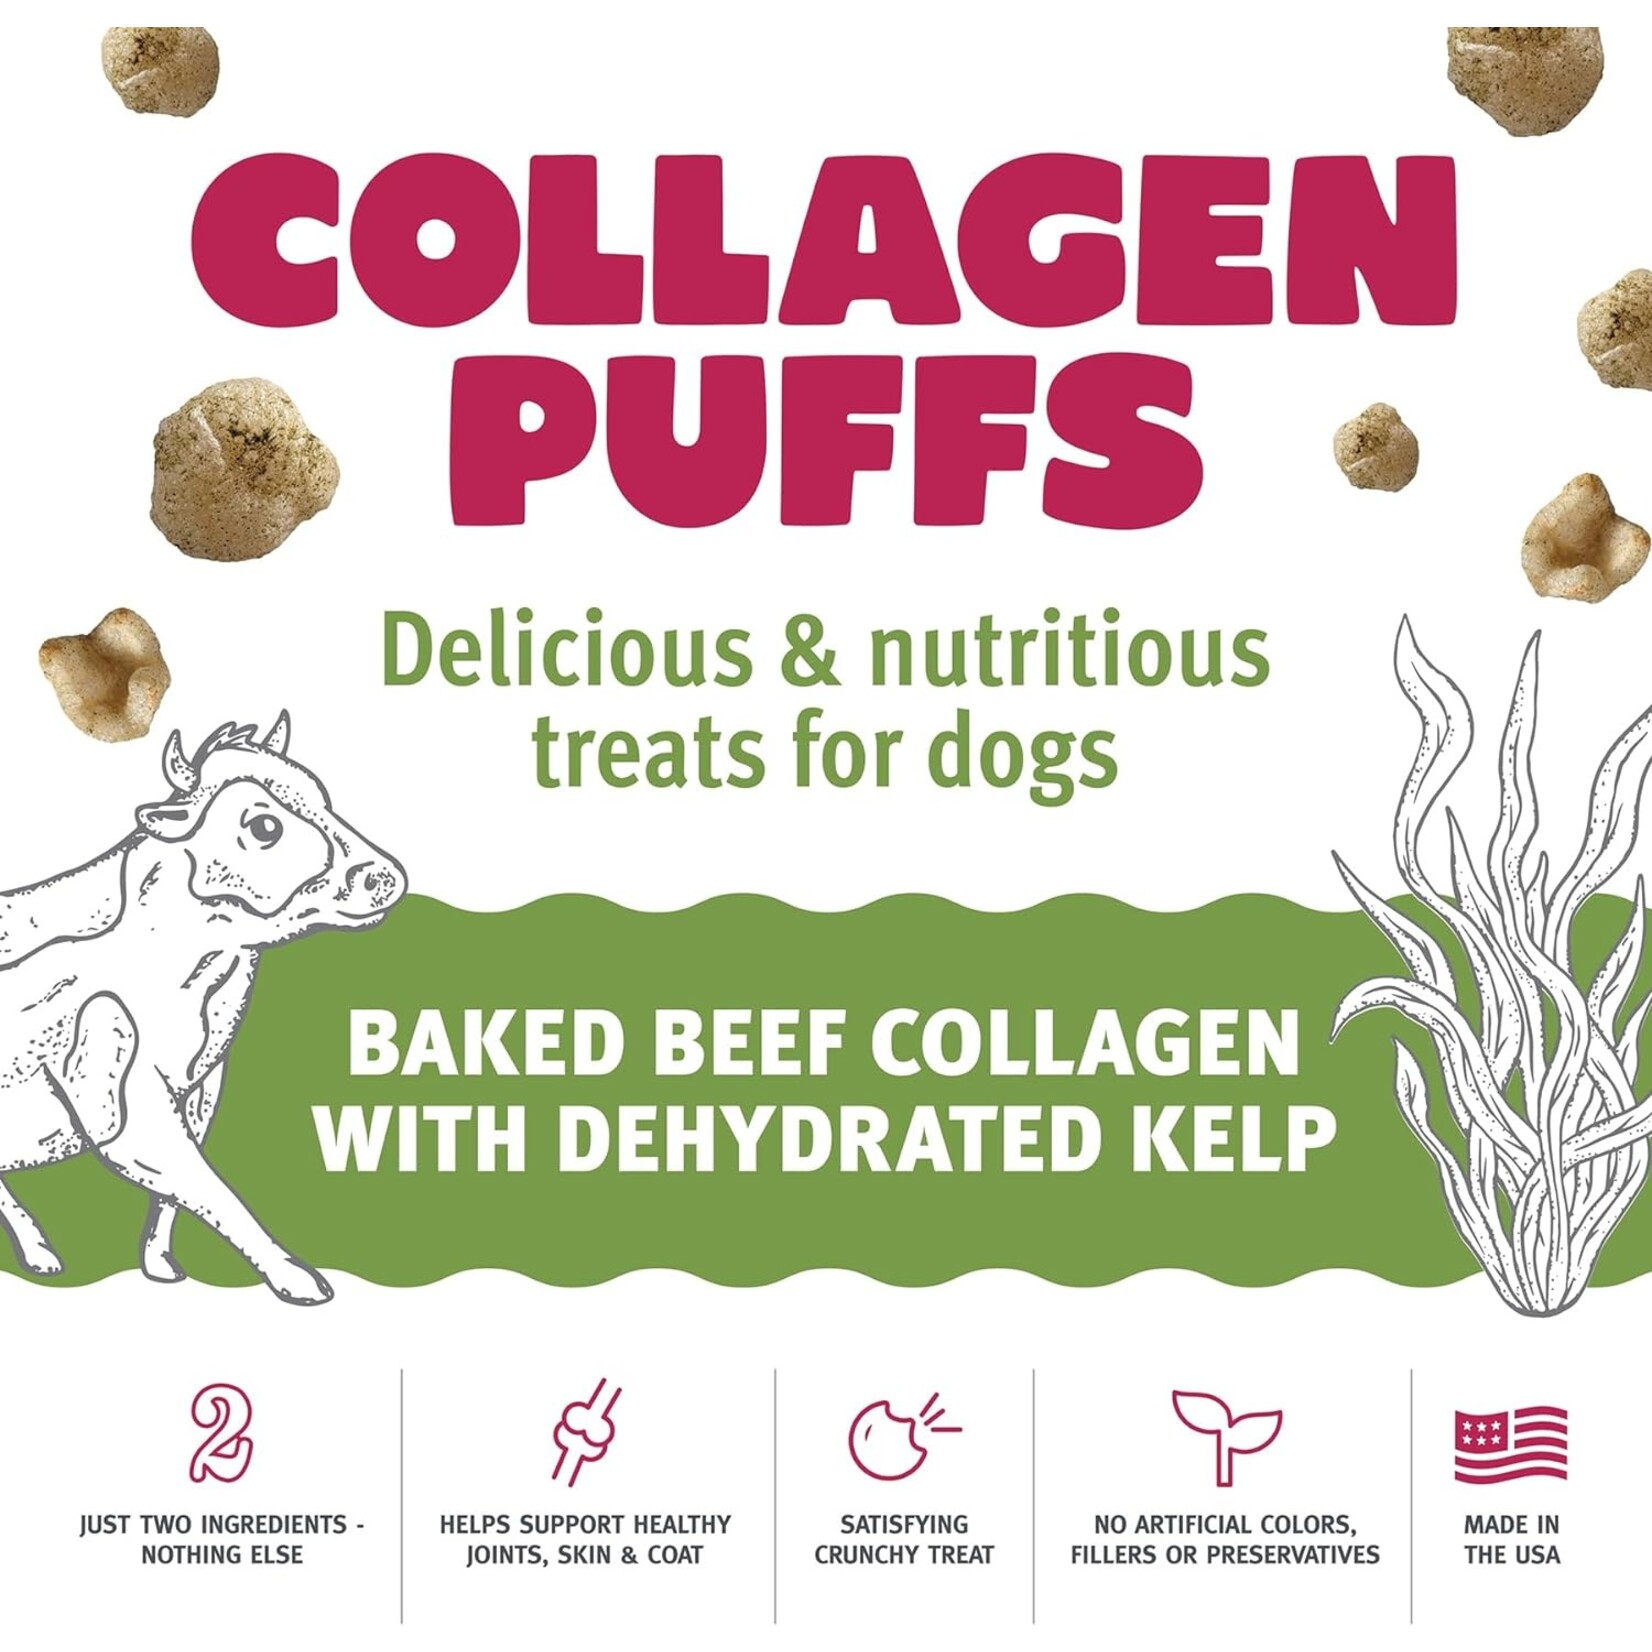 Icelandic+ Icelandic+ Beef Collagen Puffs with Kelp Treats for Small Dogs 1.3oz